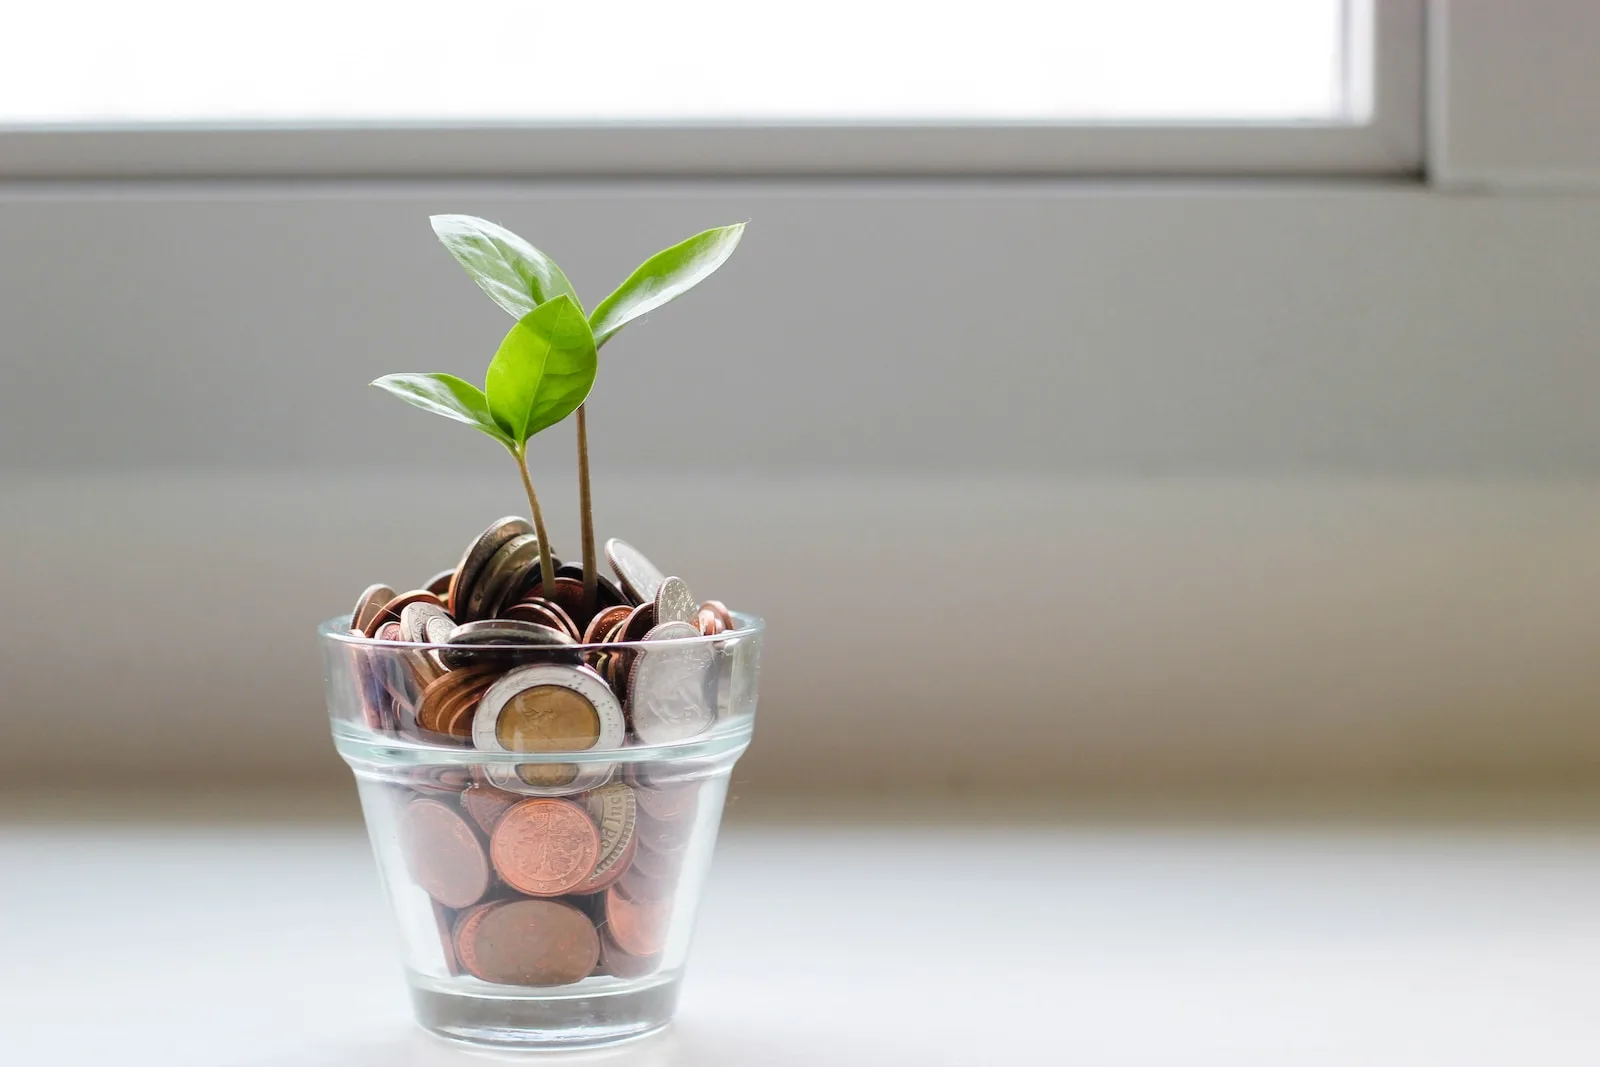 Green plant in transparent cup with coins